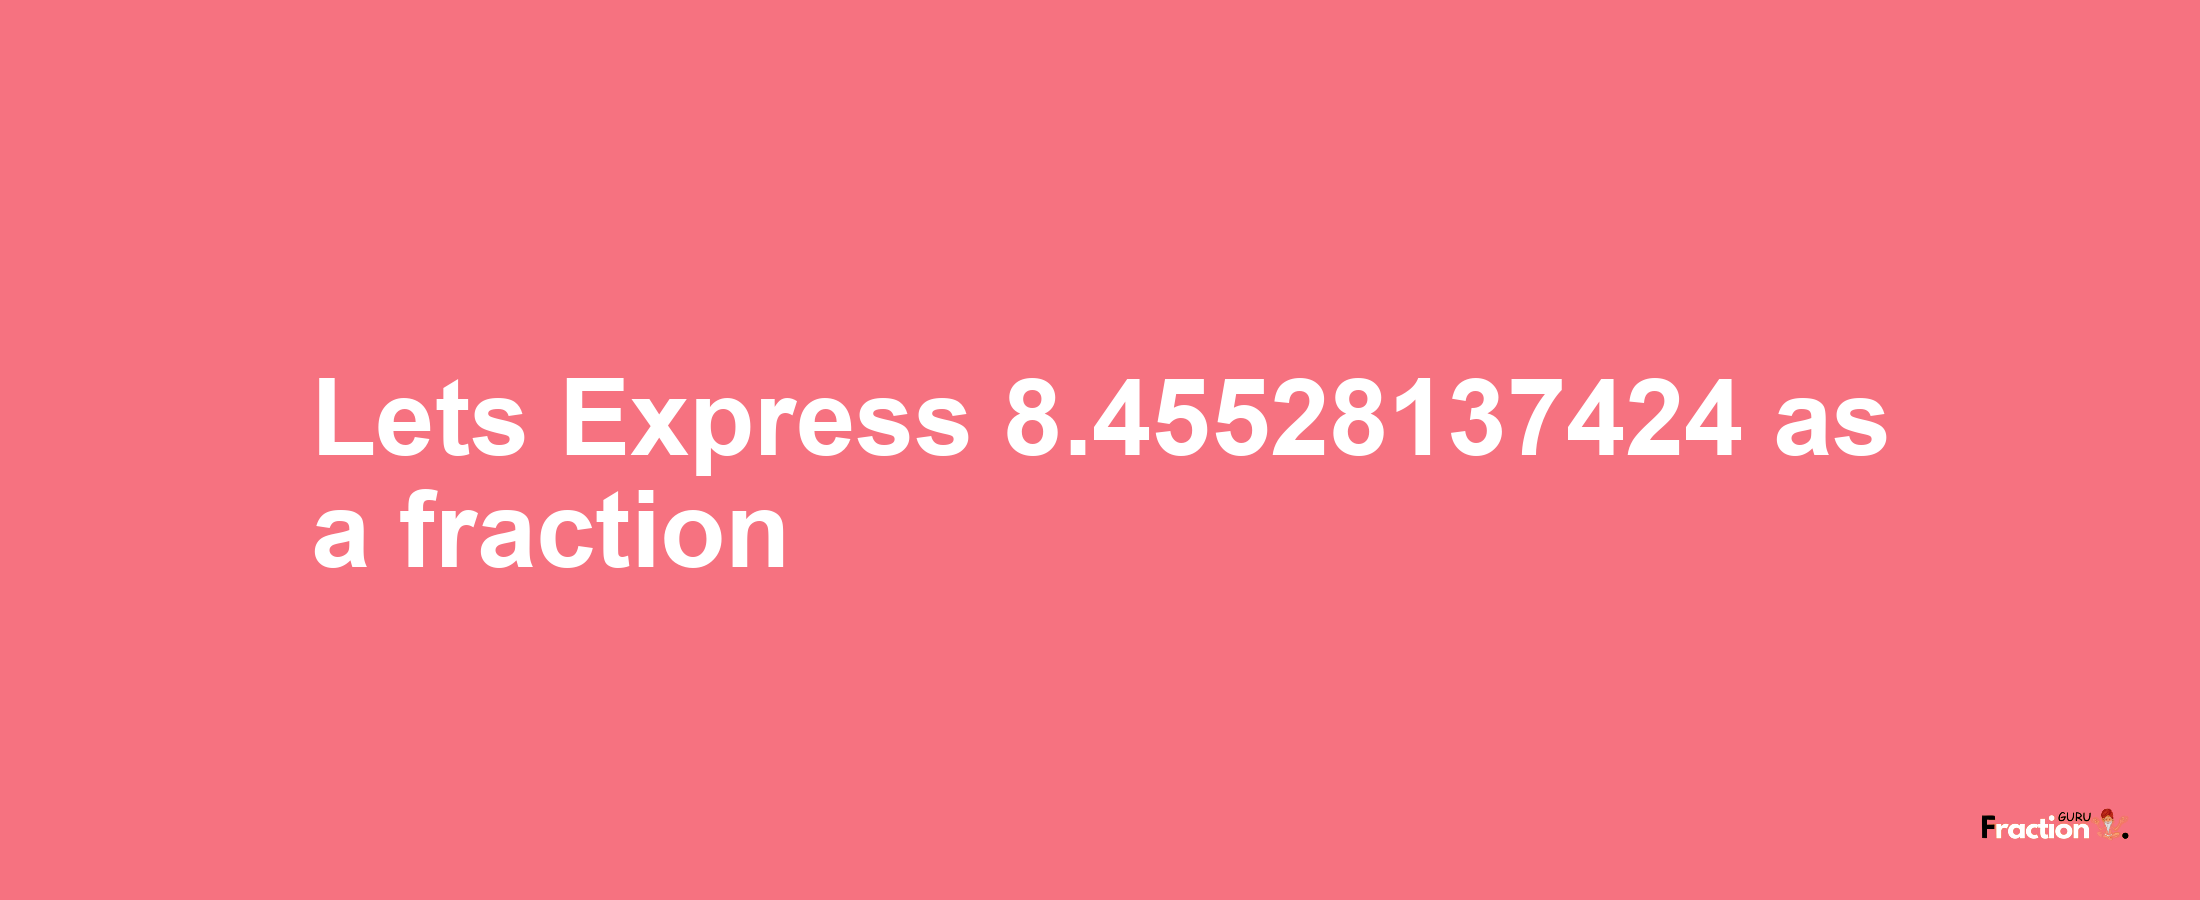 Lets Express 8.45528137424 as afraction